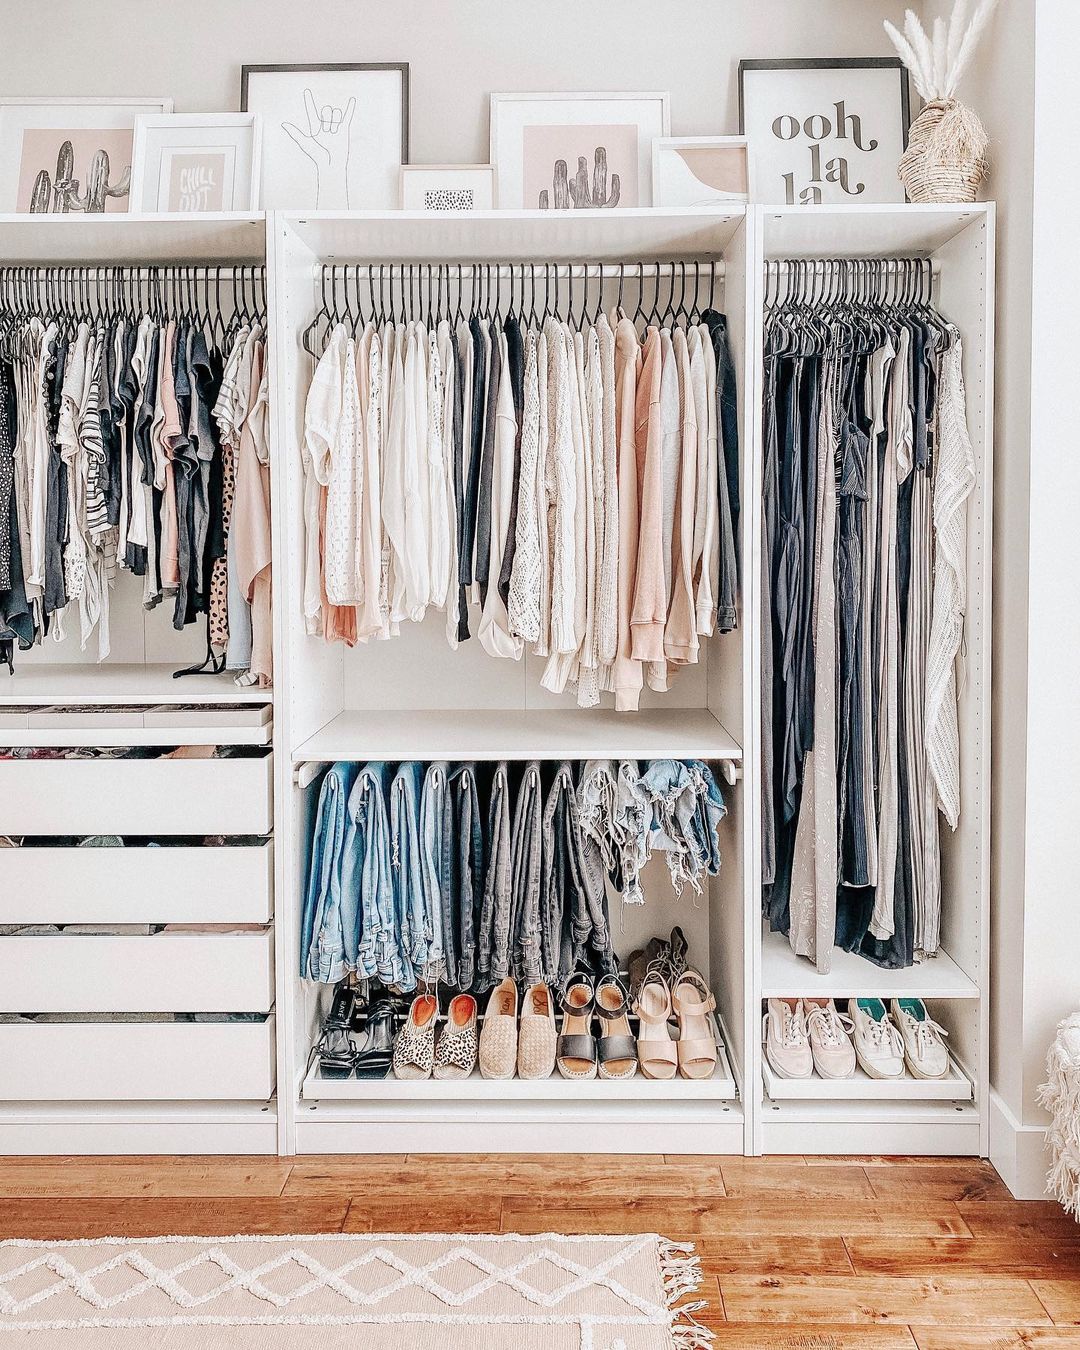 A nicely organized white closet with shoes and clothes. Photo by Instagram user @bymeghang